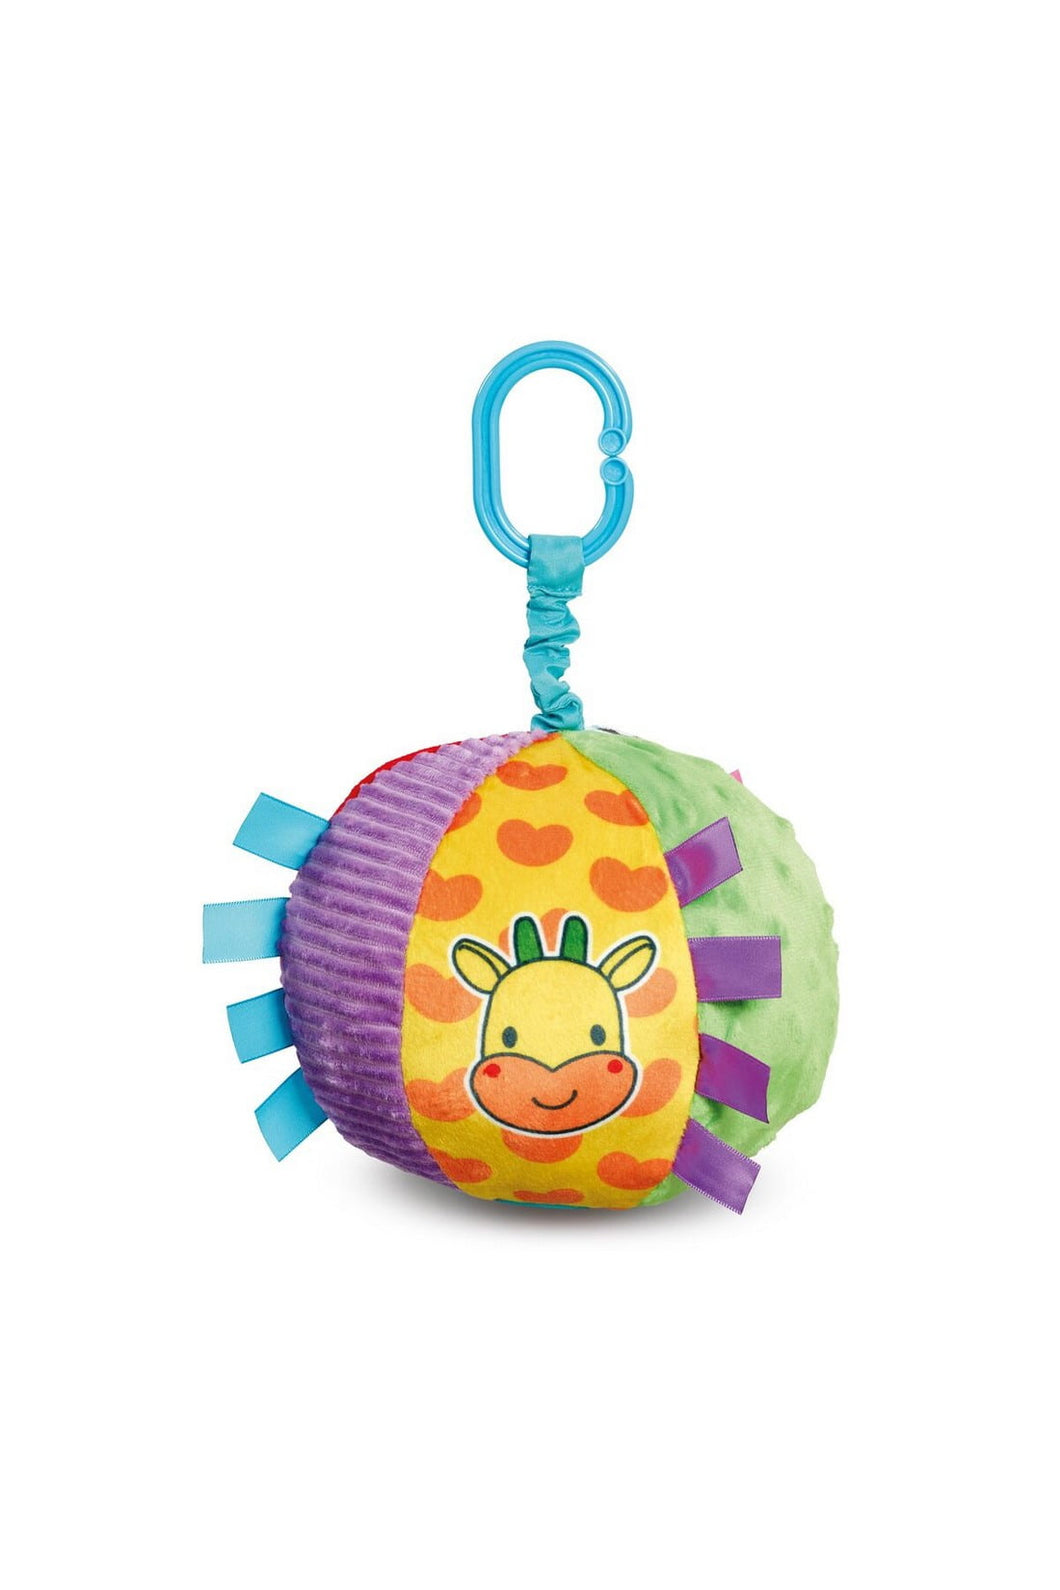 Addo Little Lot Baby's First Activity Ball